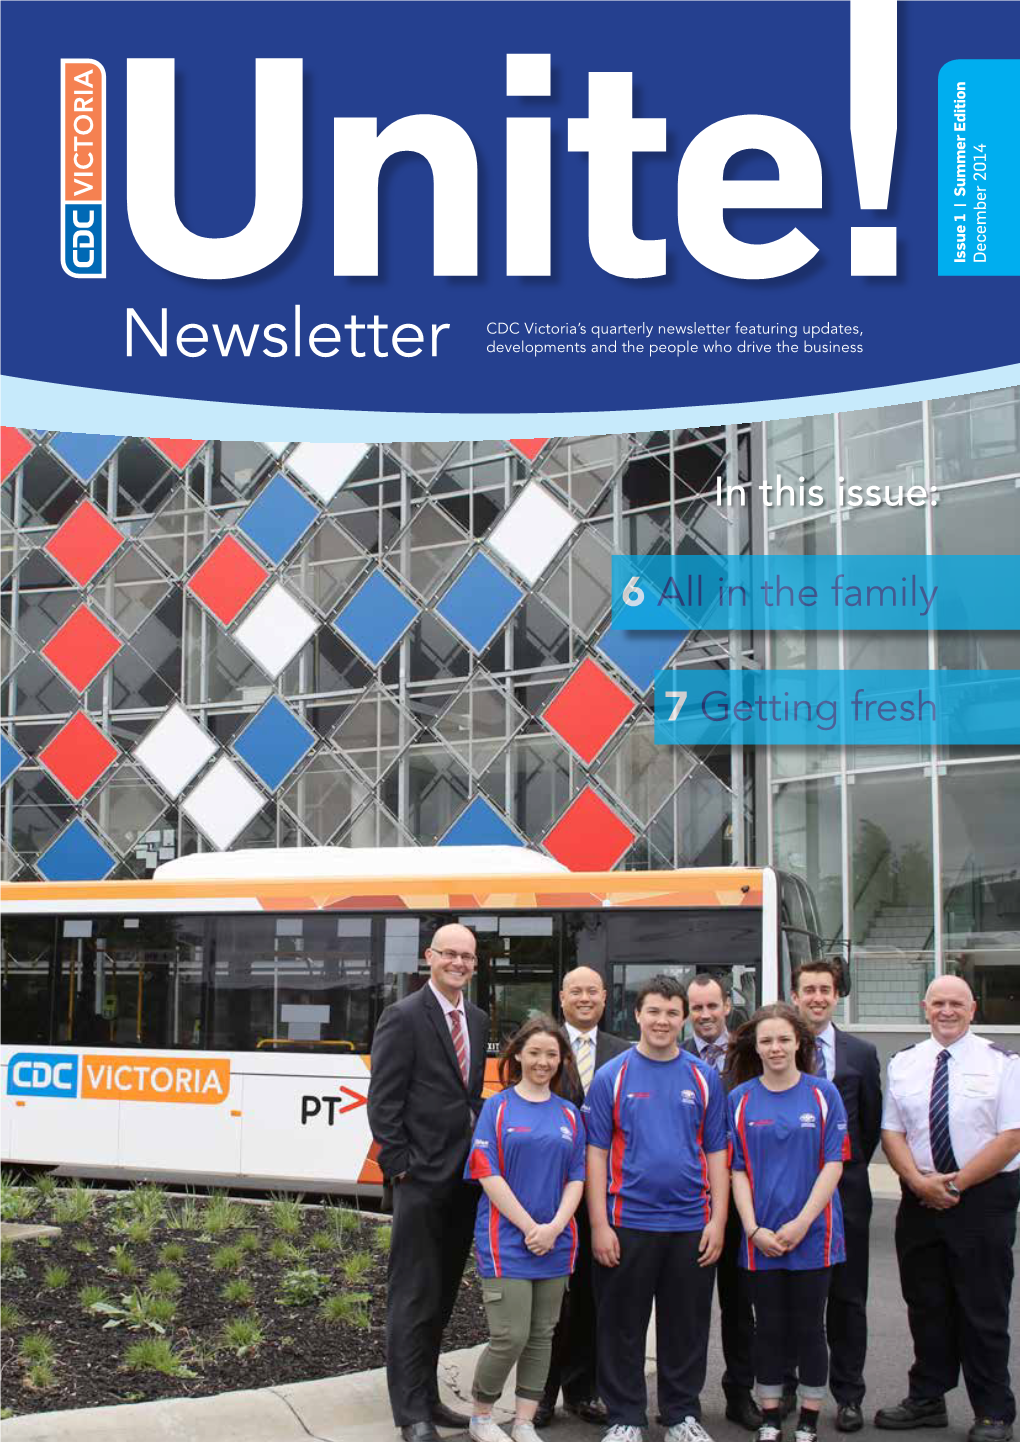 Newsletter Featuring Updates, Newsletter Developments and the People Who Drive the Business